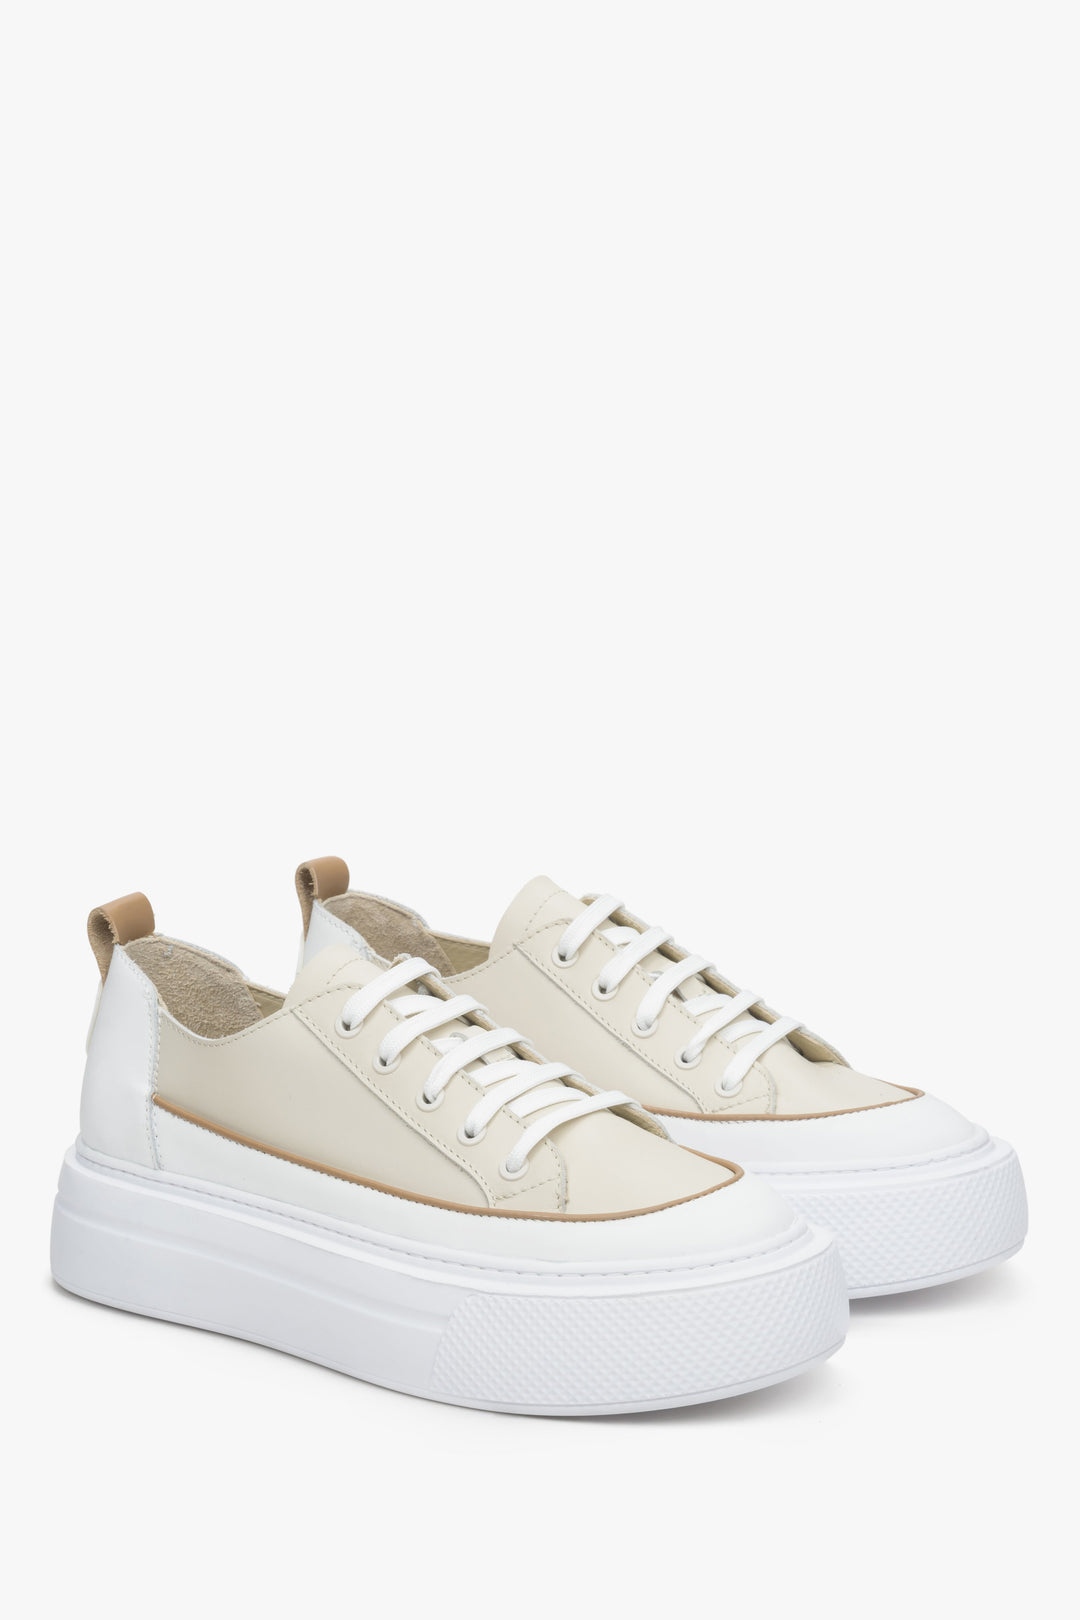 Women's low top sneakers made of natural leather in beige and white.